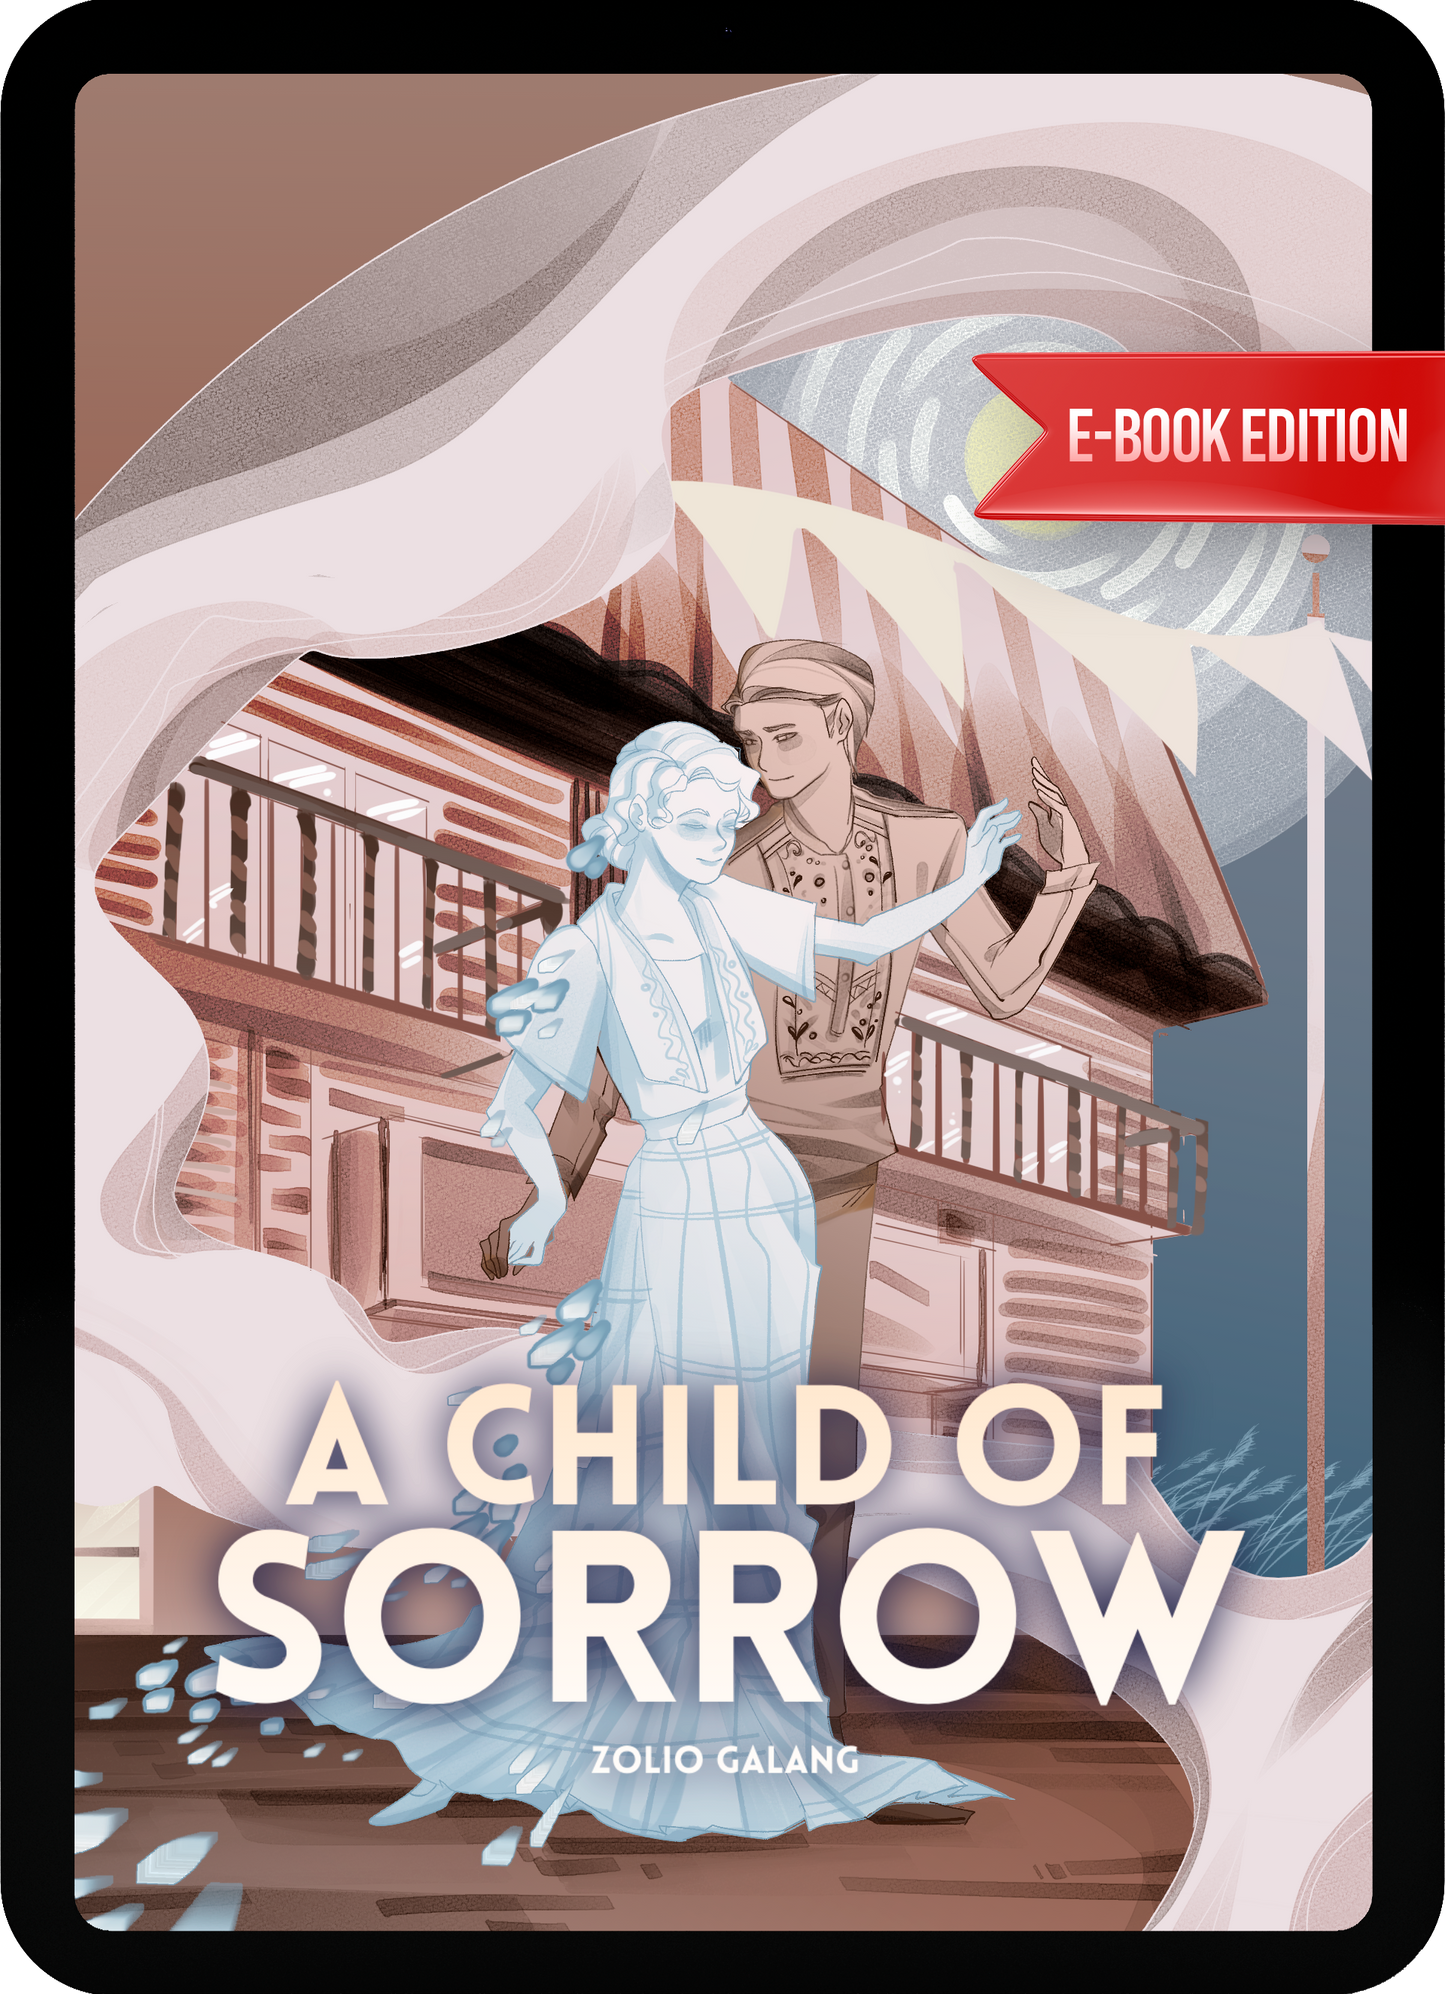 eBook - A Child of Sorrow by Zolio Galang